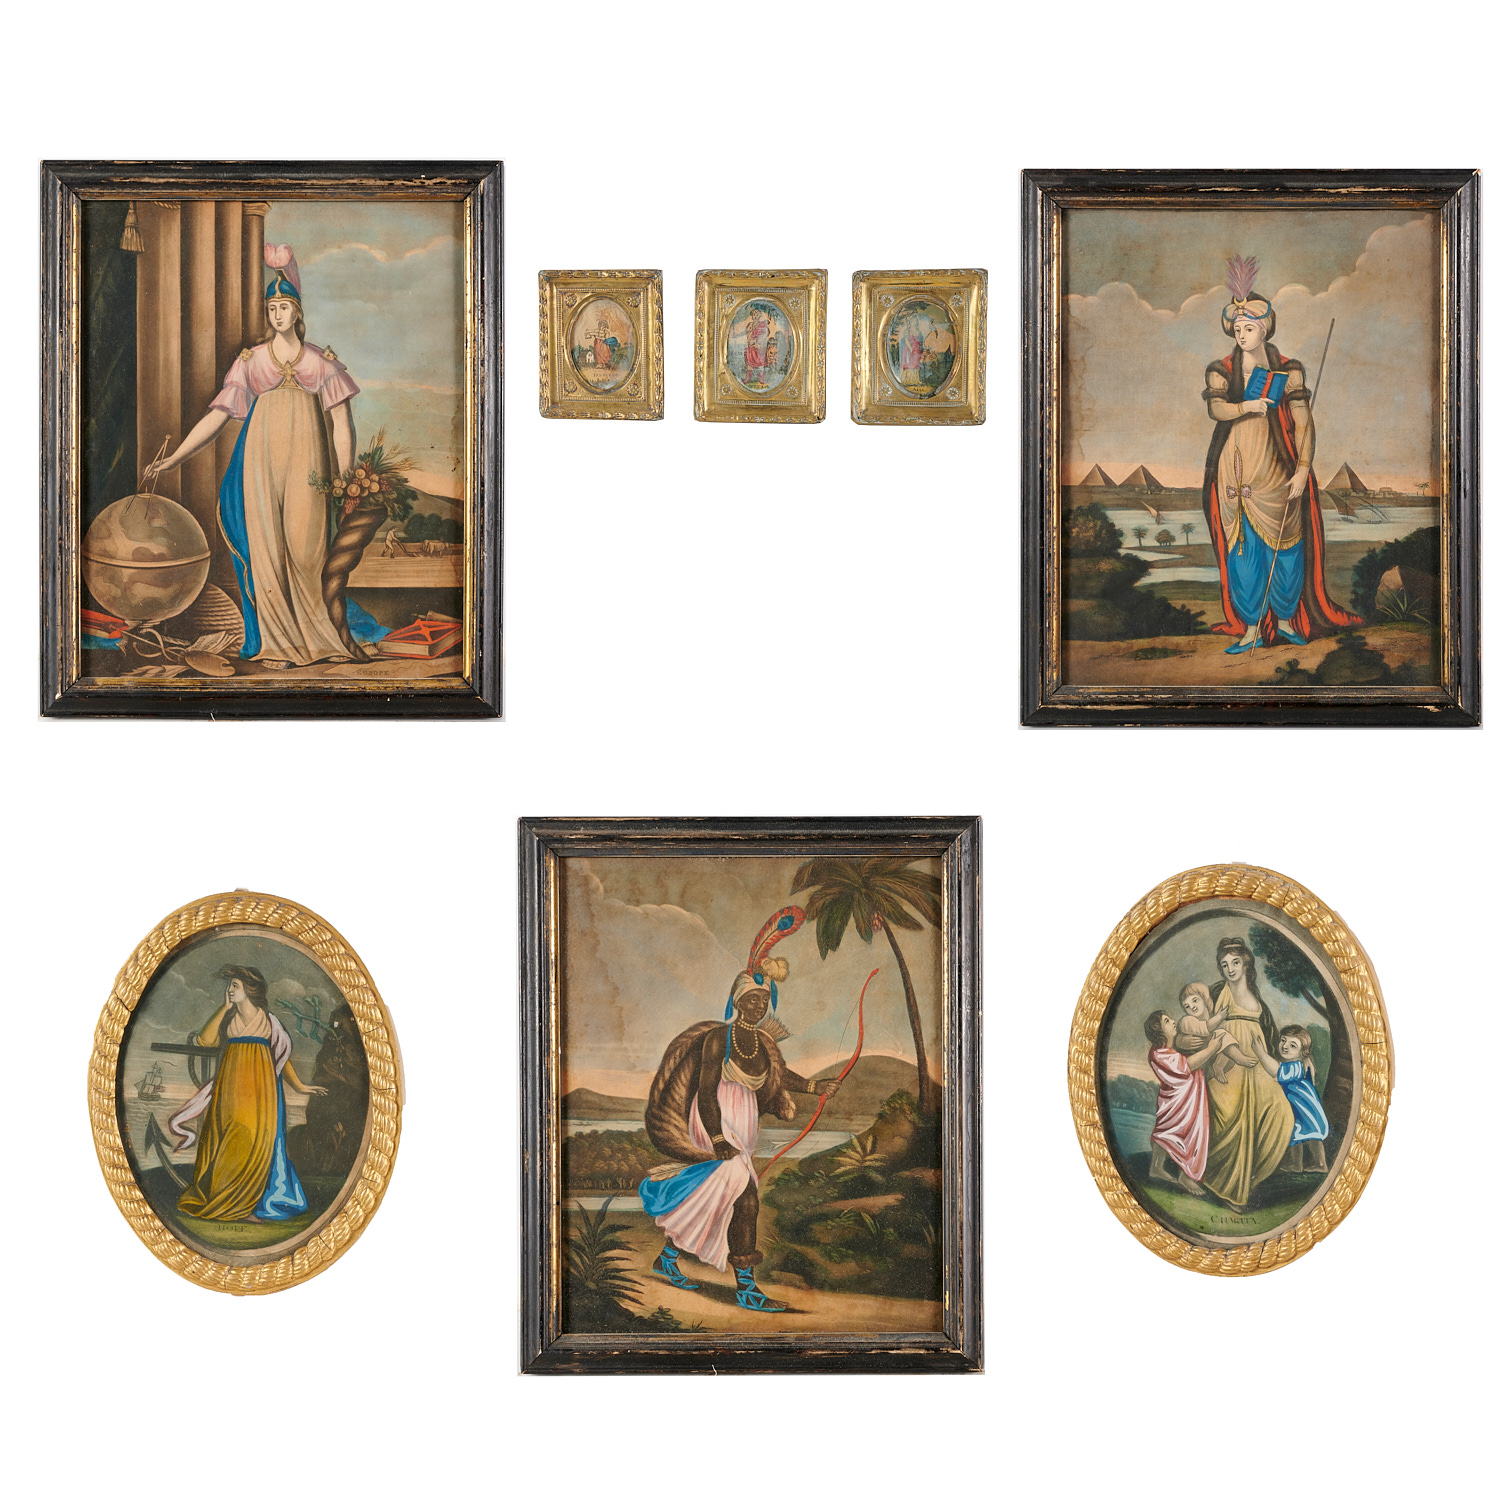  8 HAND COLORED ALLEGORICAL ENGRAVINGS 362439